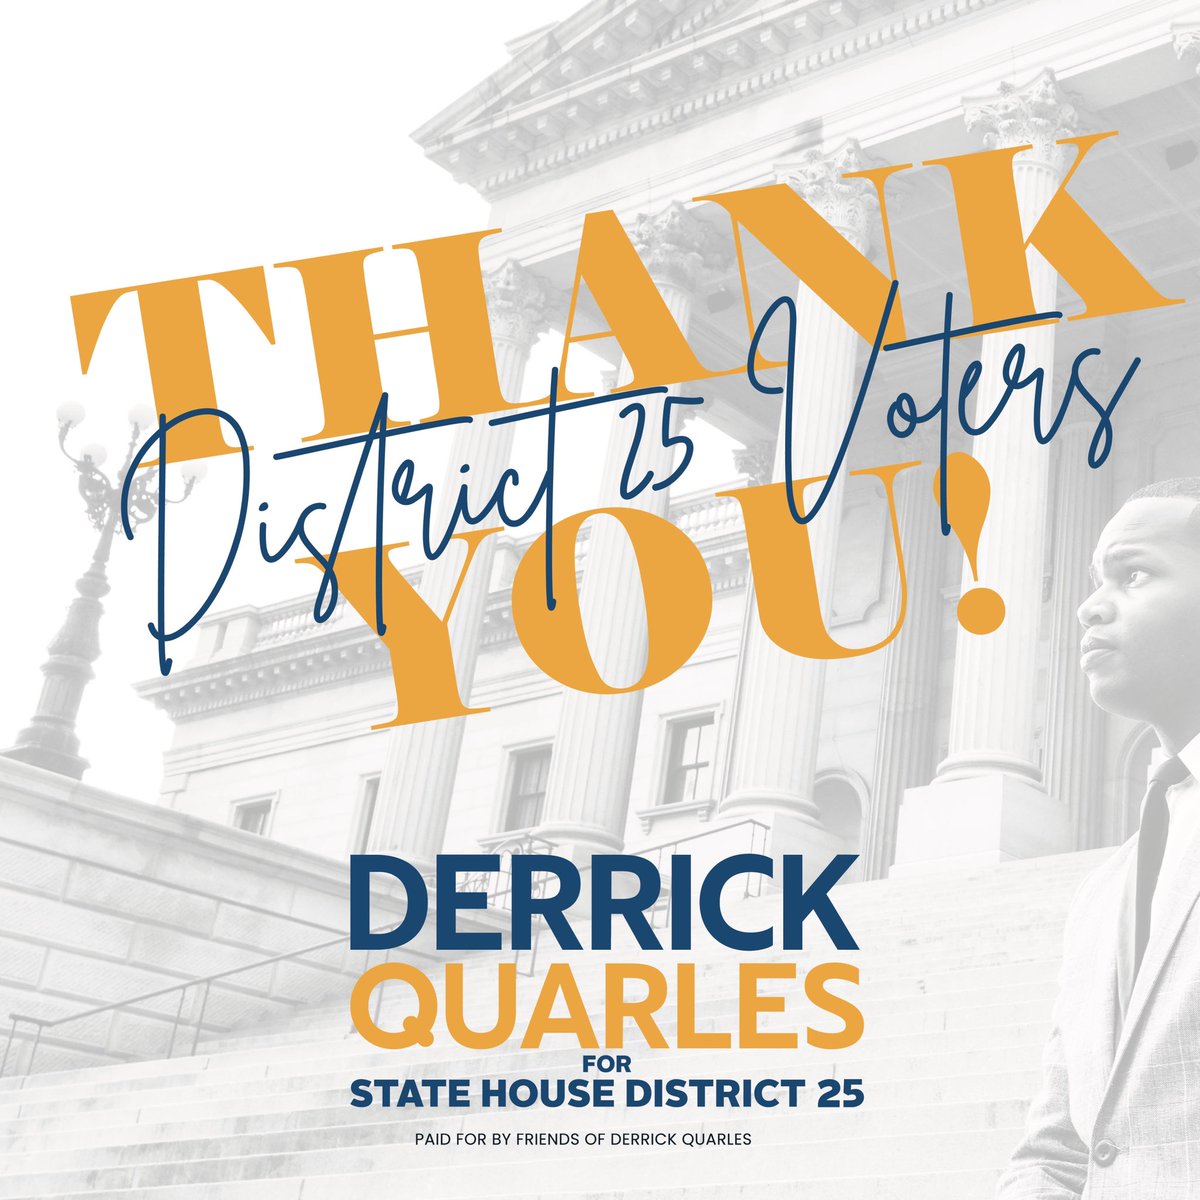 Thank you to the thousands of people who fueled this campaign. When we started this journey, it was never about just me—but about every one of you. Make no mistake: This fight didn’t just begin, and it’s not ending. Can I count on you to stay in this fight with me?